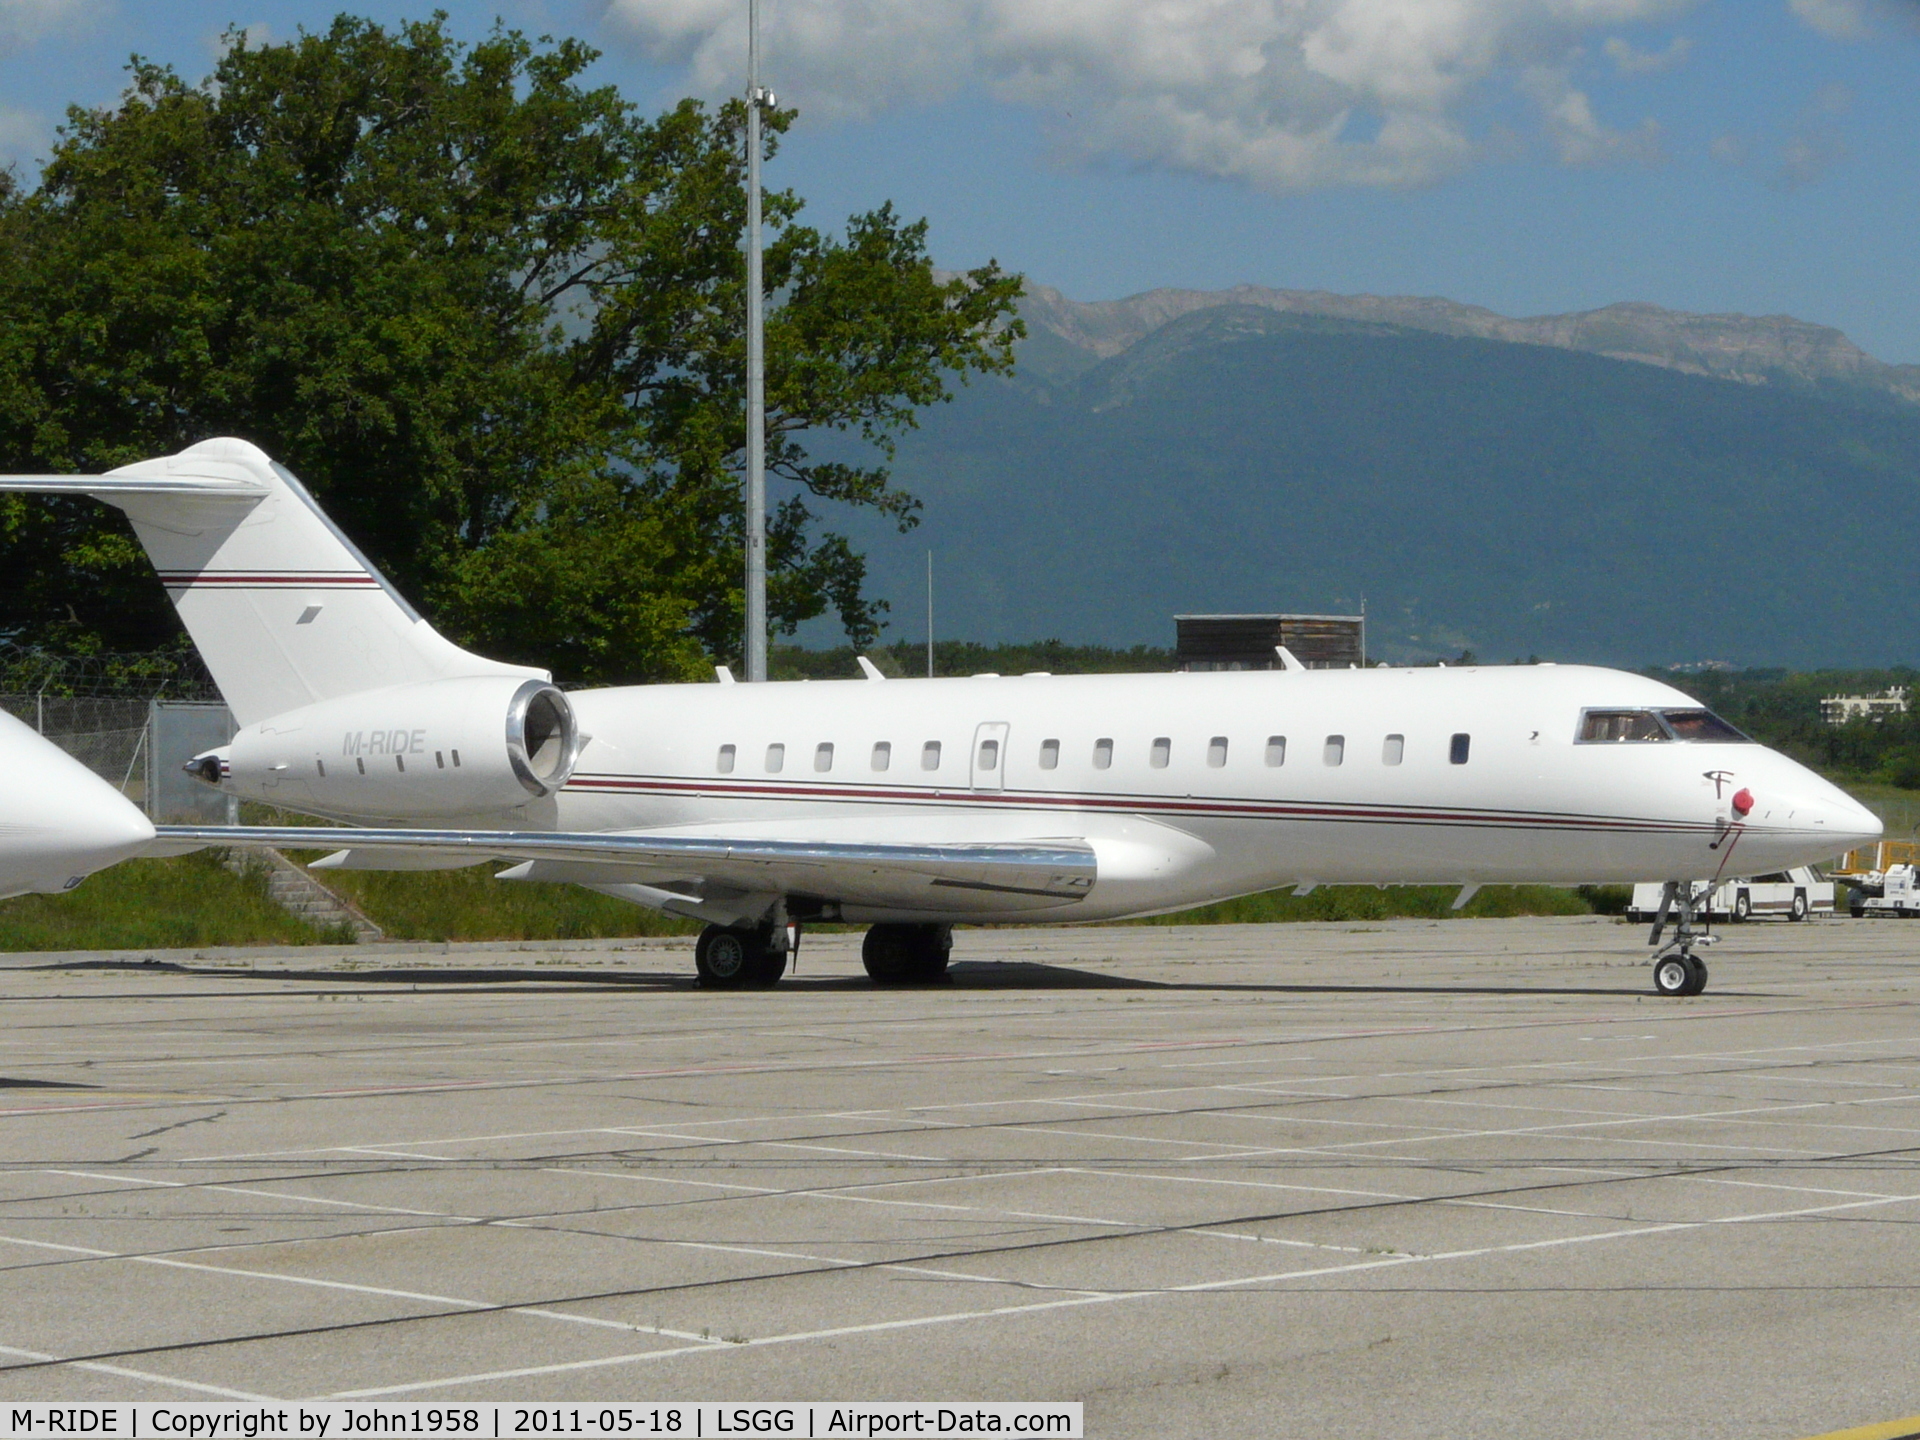 M-RIDE, 2006 Bombardier BD-700-1A10 Global 5000 C/N 9190, Parked